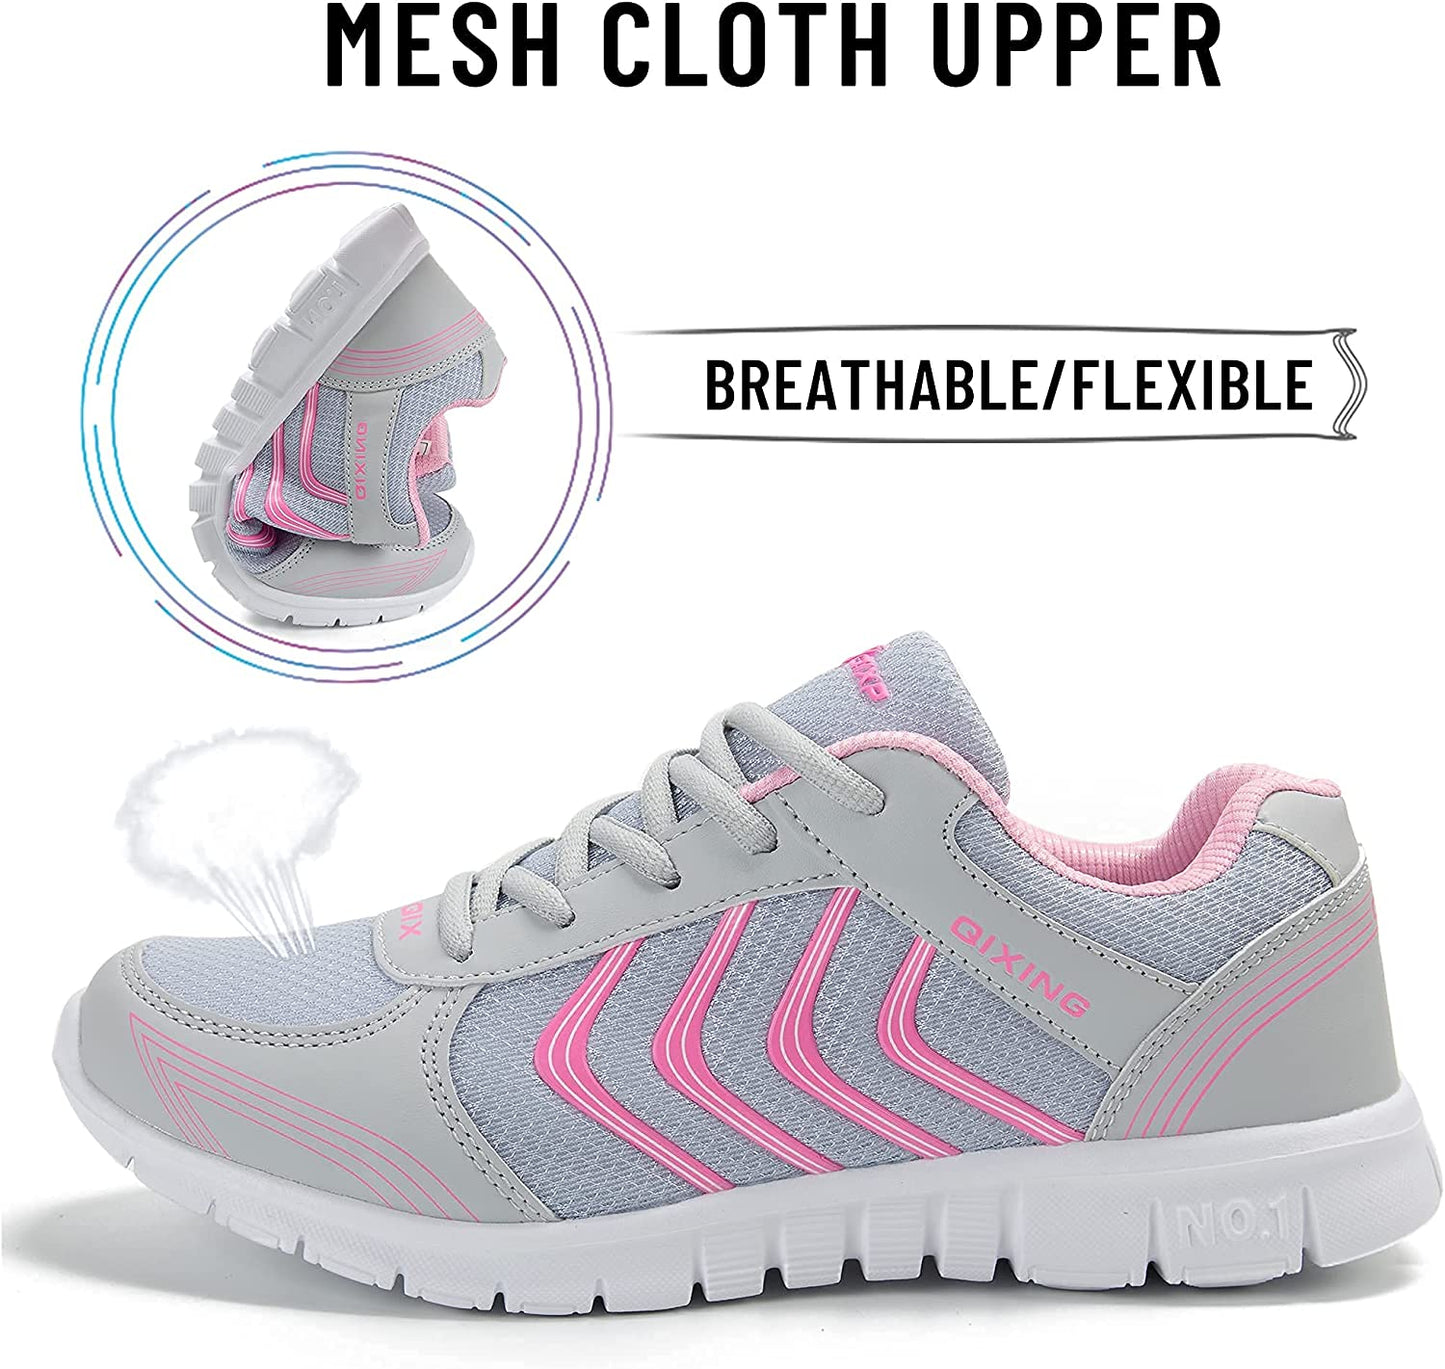 Women's Athletic Road Running Mesh Breathable Casual Sneakers Lace up Comfort Sports Student Fashion Tennis Shoes